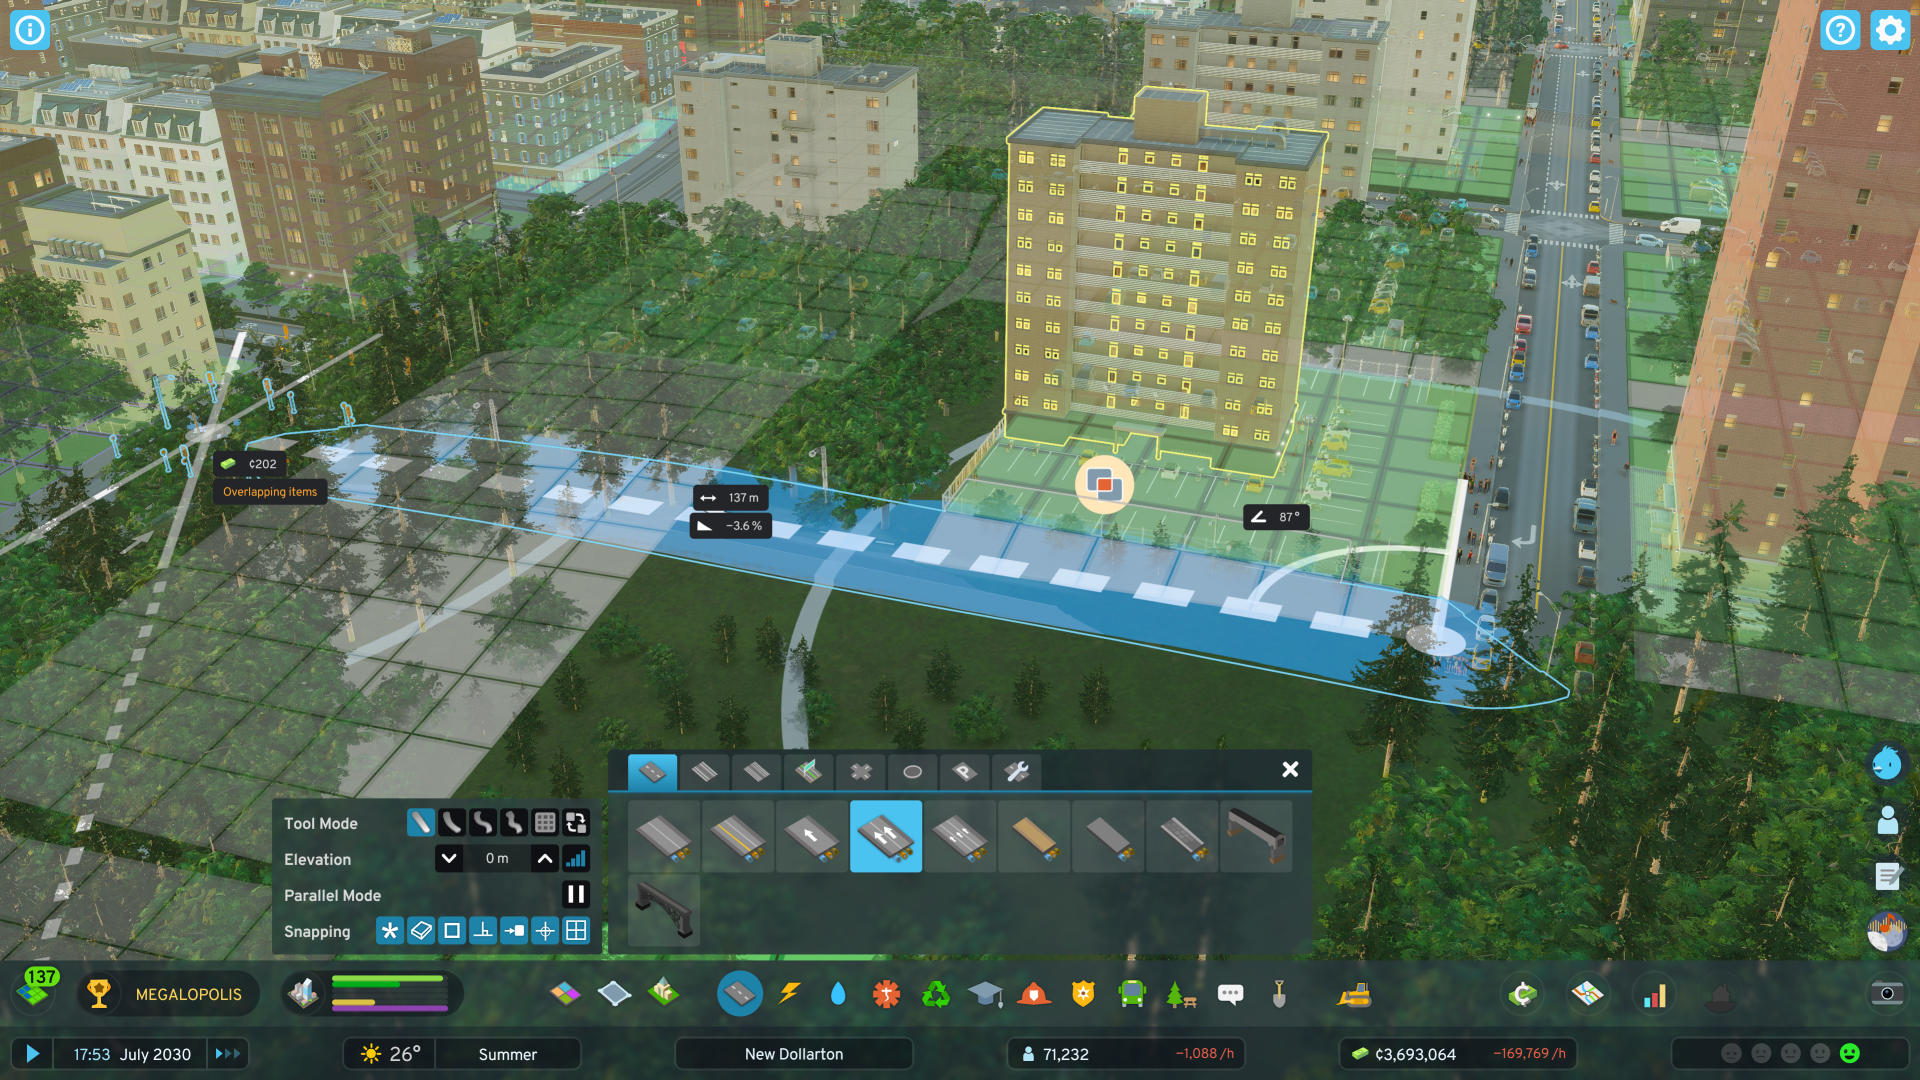 Please add multiplayer/co-op to Cities Skylines 2